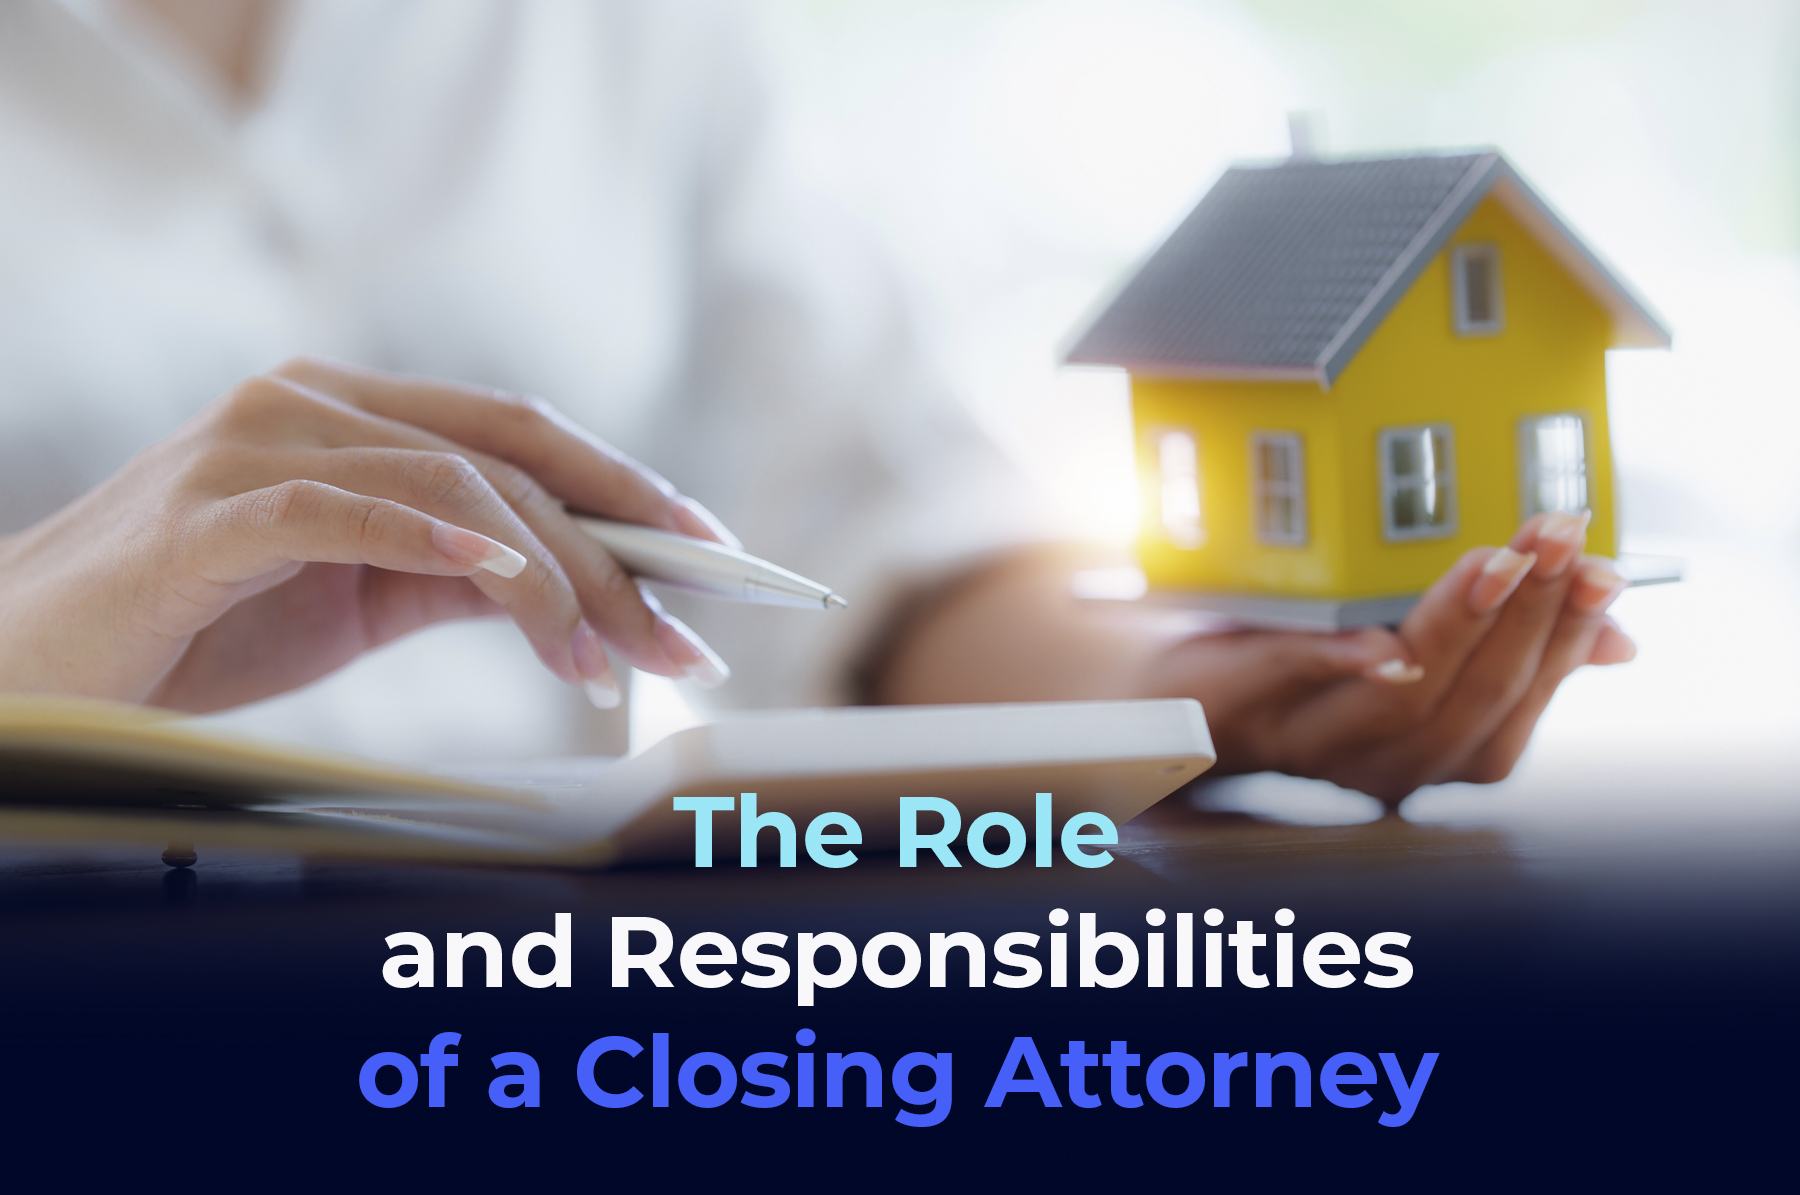 A picture of a woman left hand with a small yellow house and right hand with a pen with the phrase "The Role and Responsibilities of a Closing Attorney"